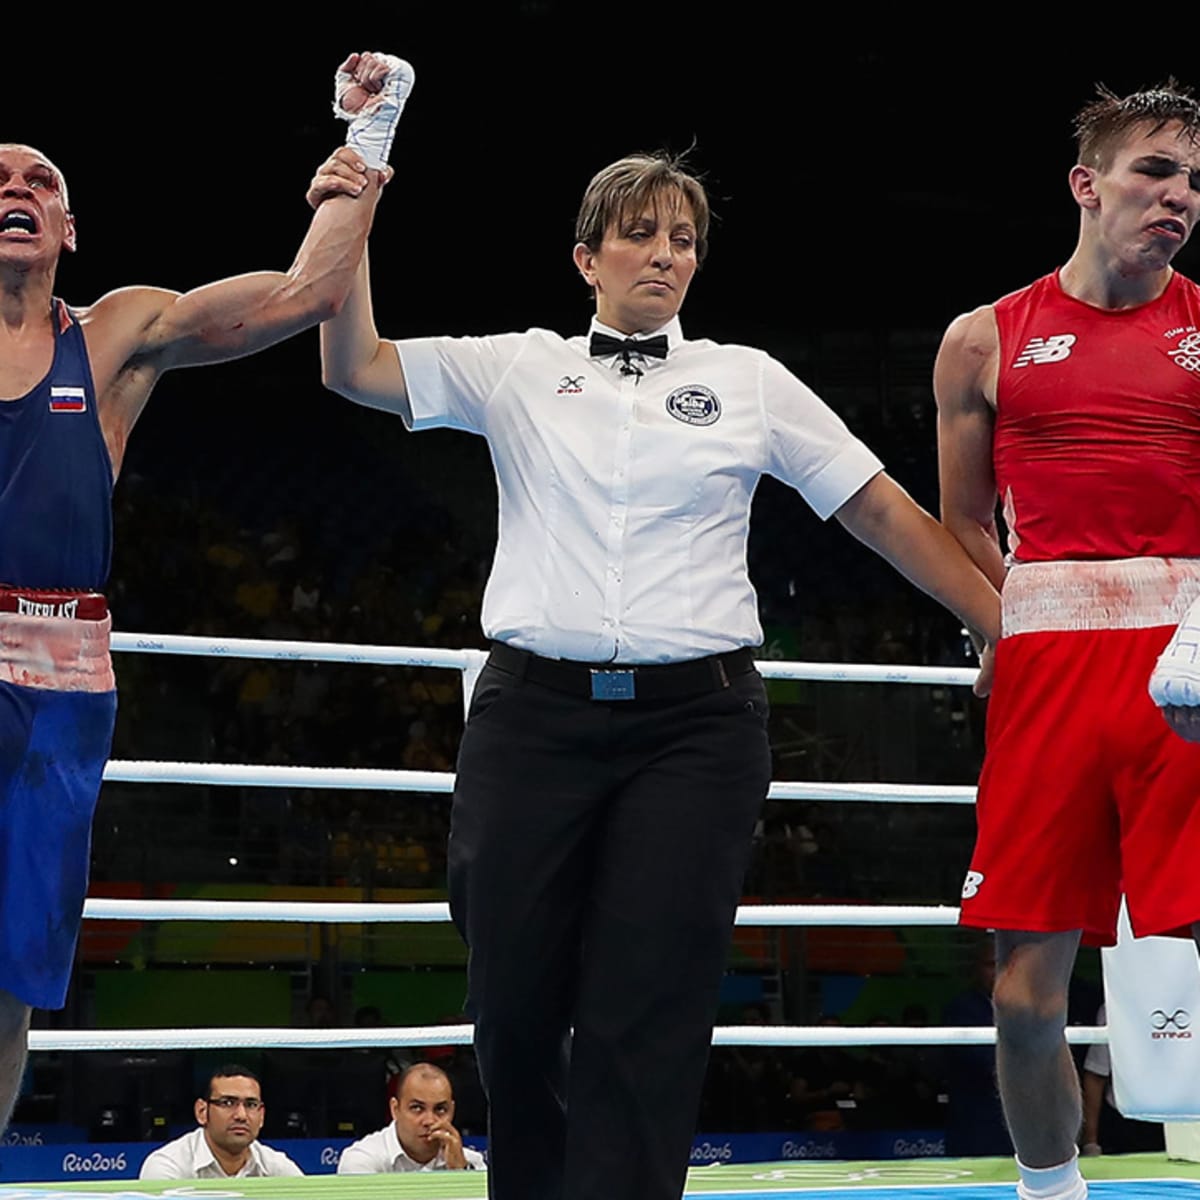 Boxing's officiating issues cast shadow at Rio Olympics - Sports Illustrated